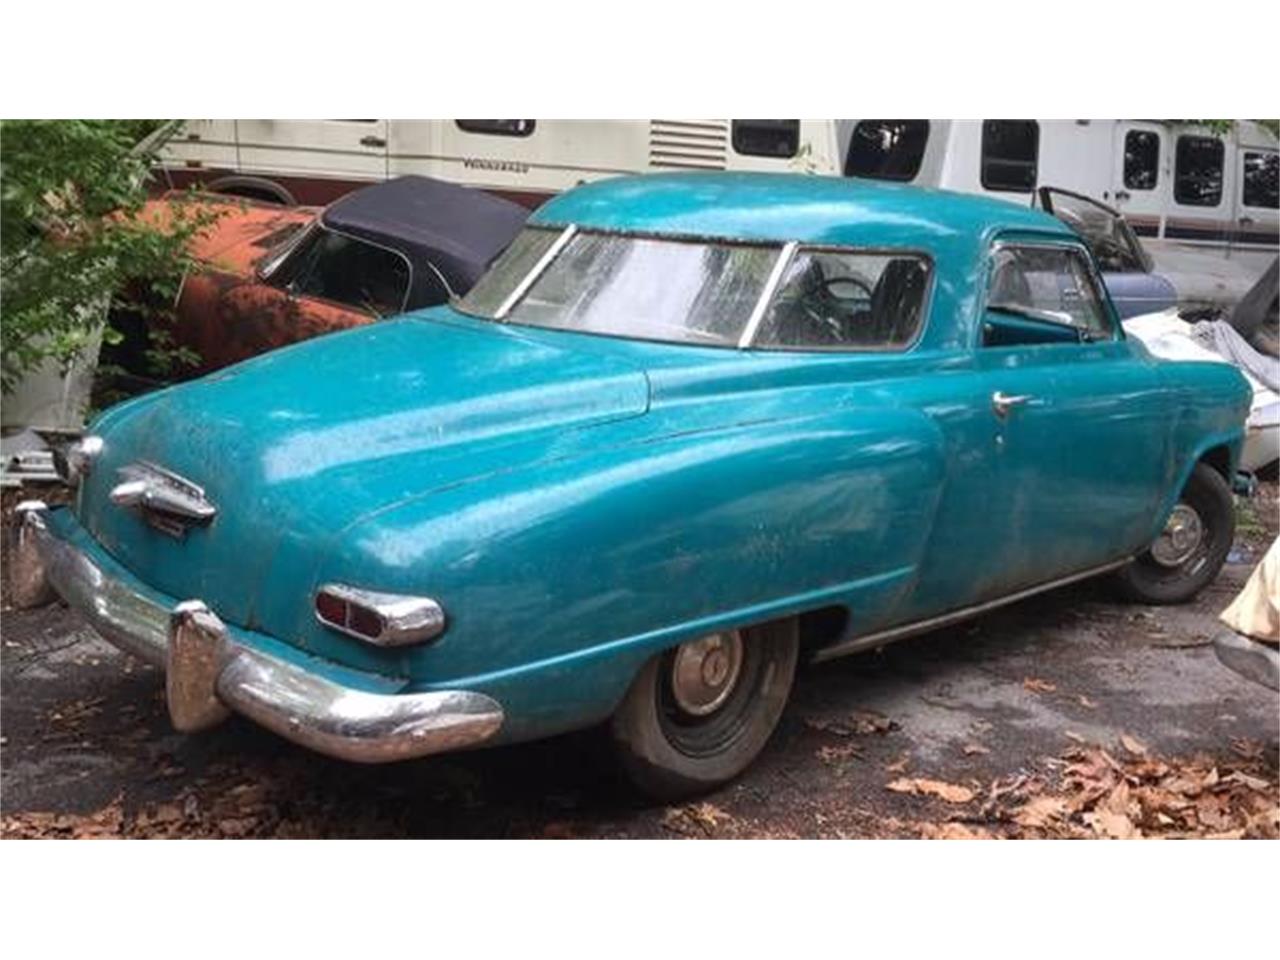 1949 Studebaker Coupe for sale in Cadillac, MI